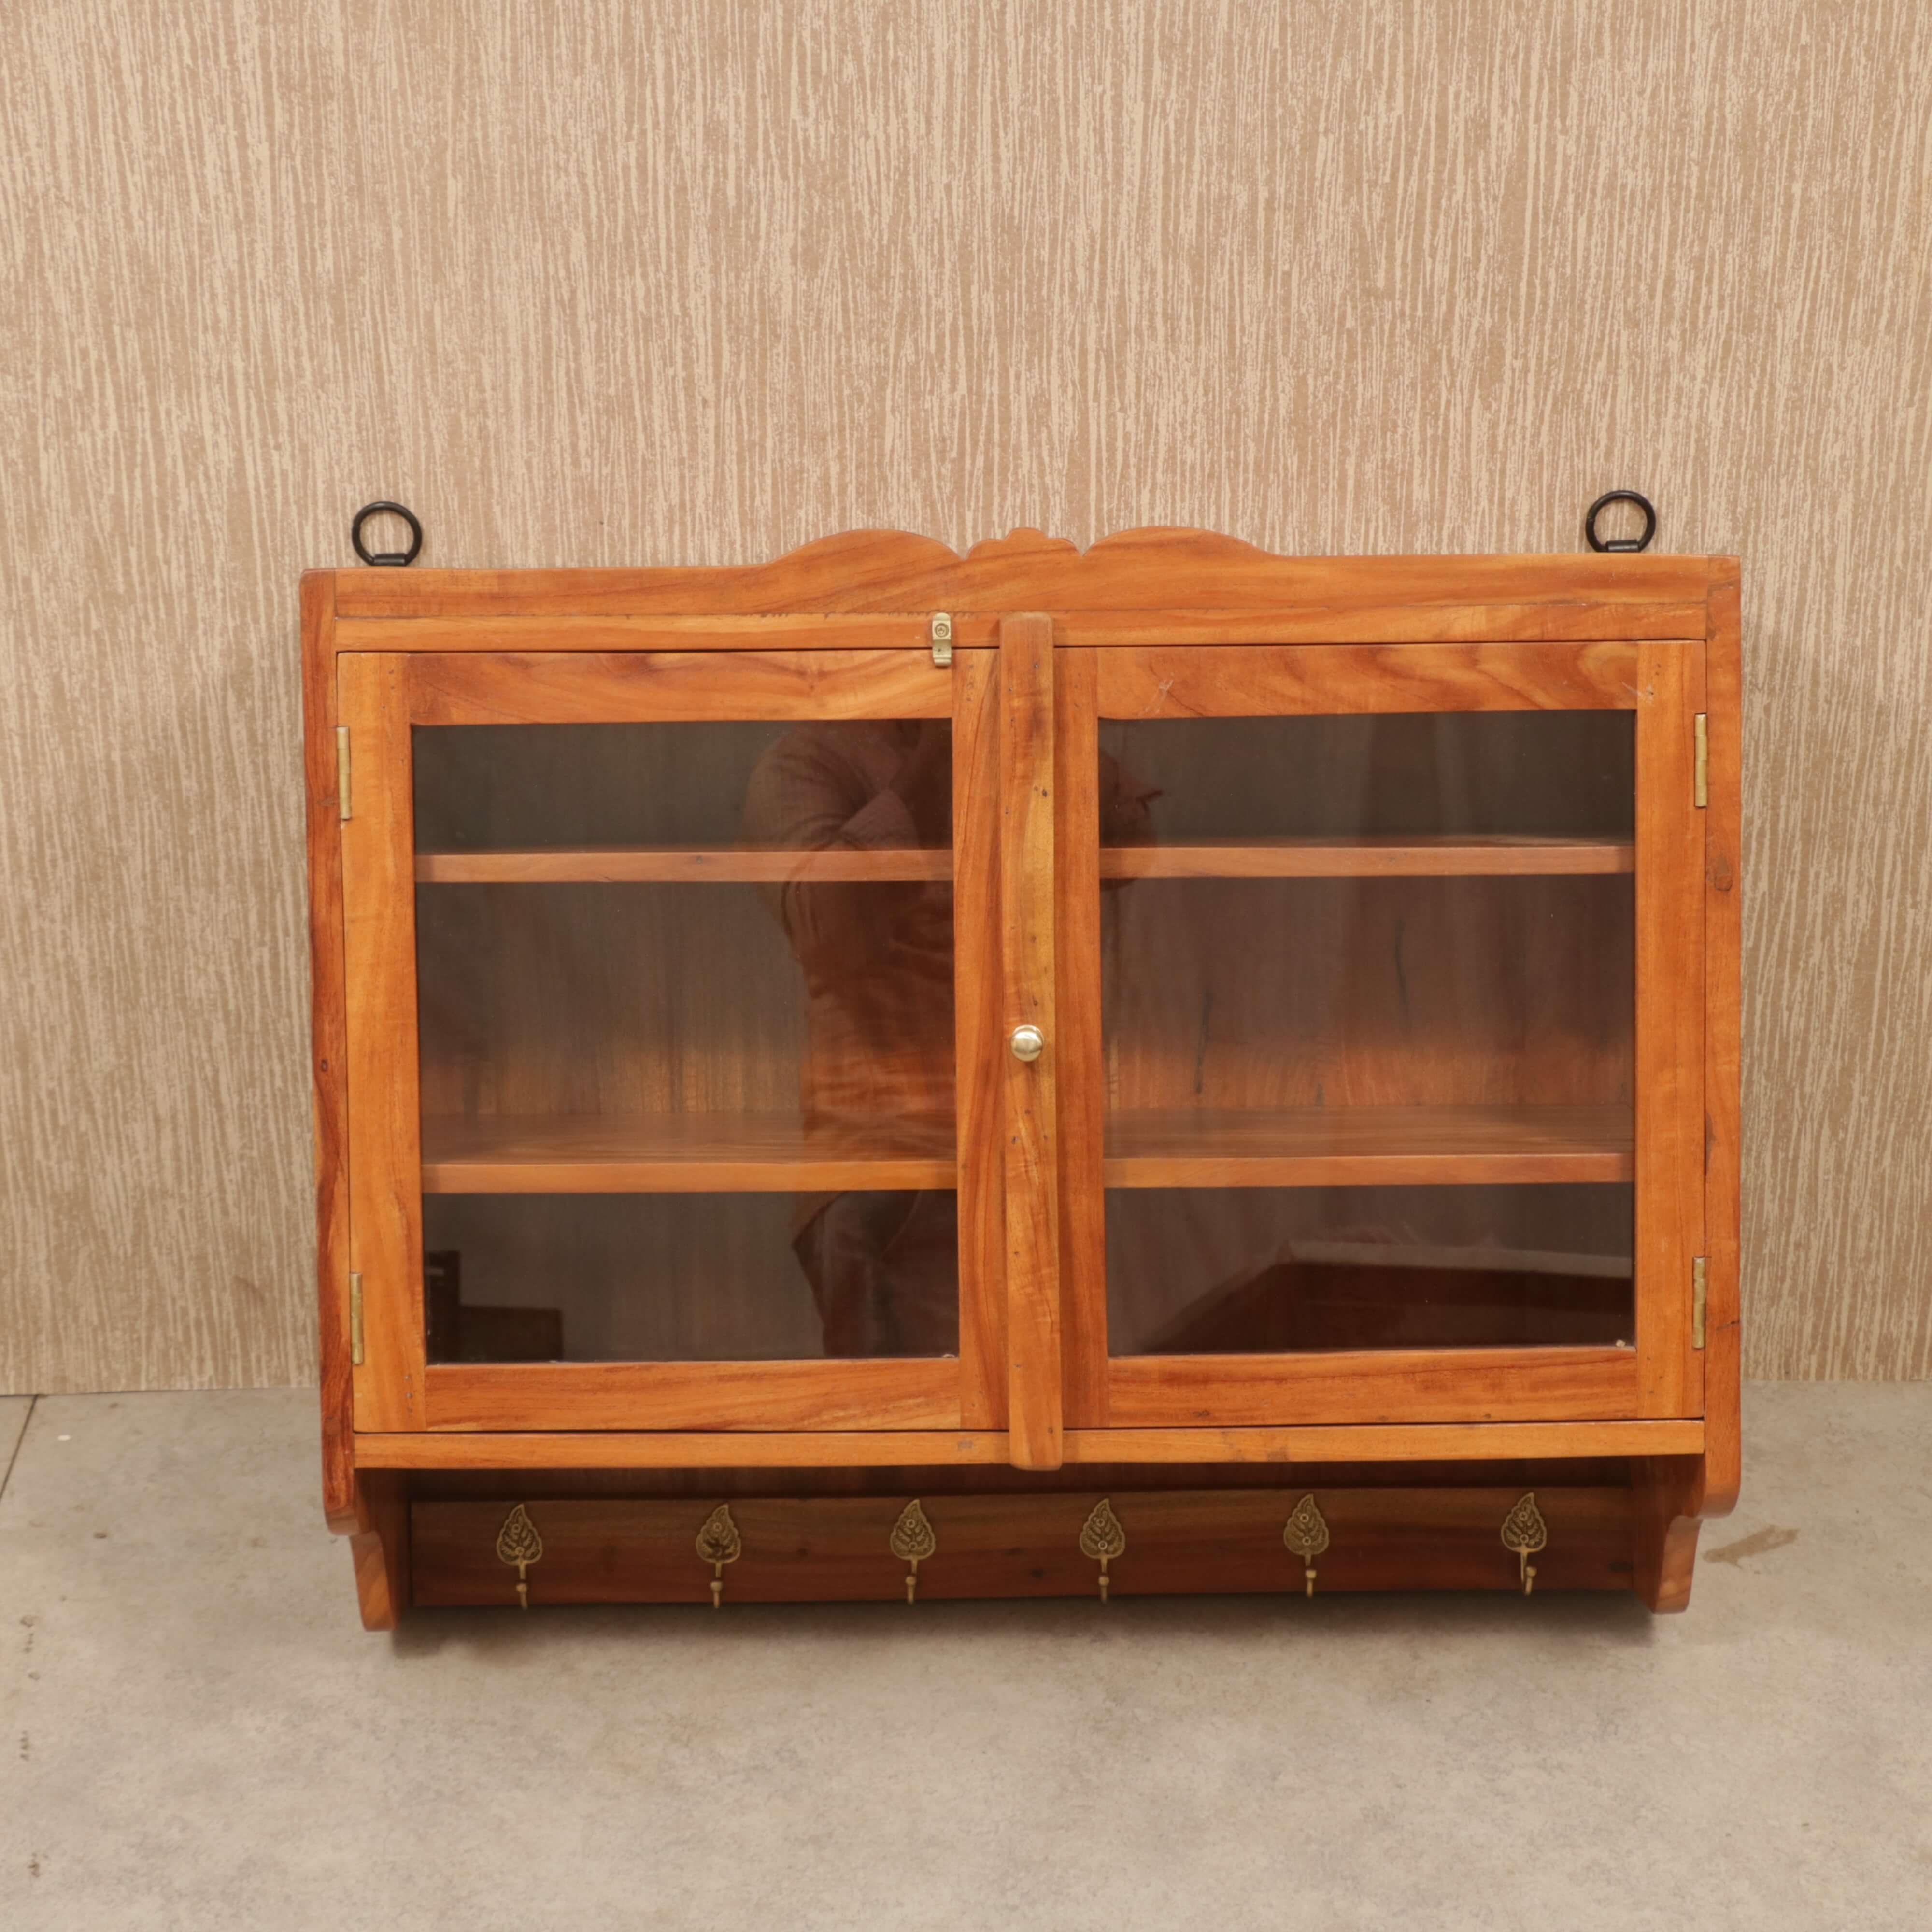 30 x 10 x 24 Inch Wide Wooden Hanging Cabinet Wall Cabinet